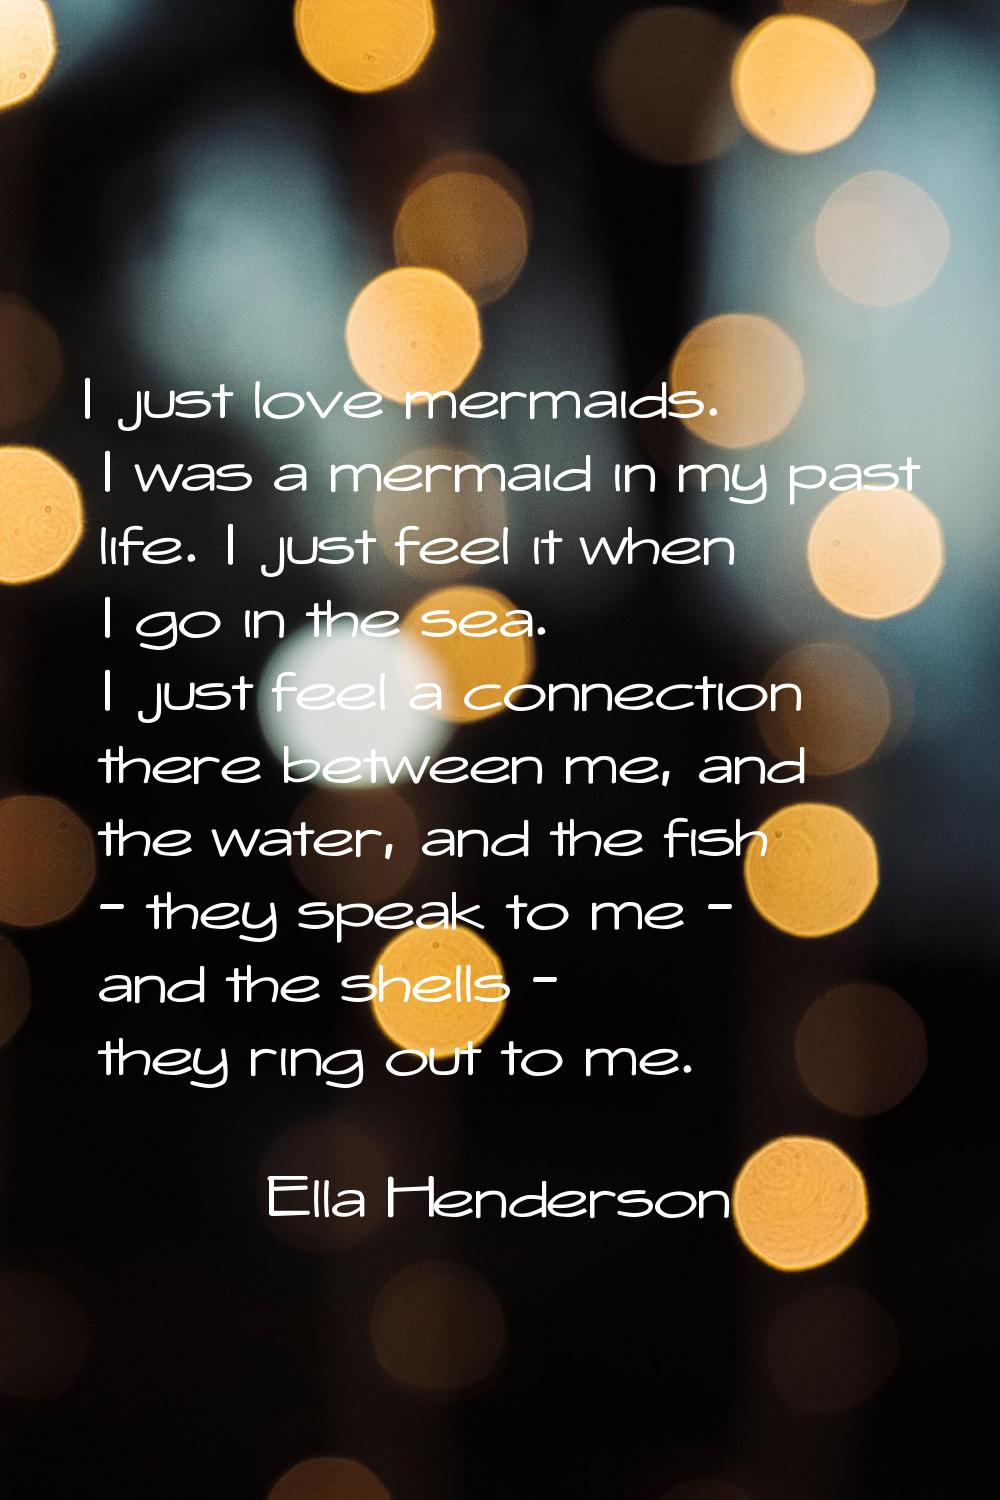 I just love mermaids. I was a mermaid in my past life. I just feel it when I go in the sea. I just 